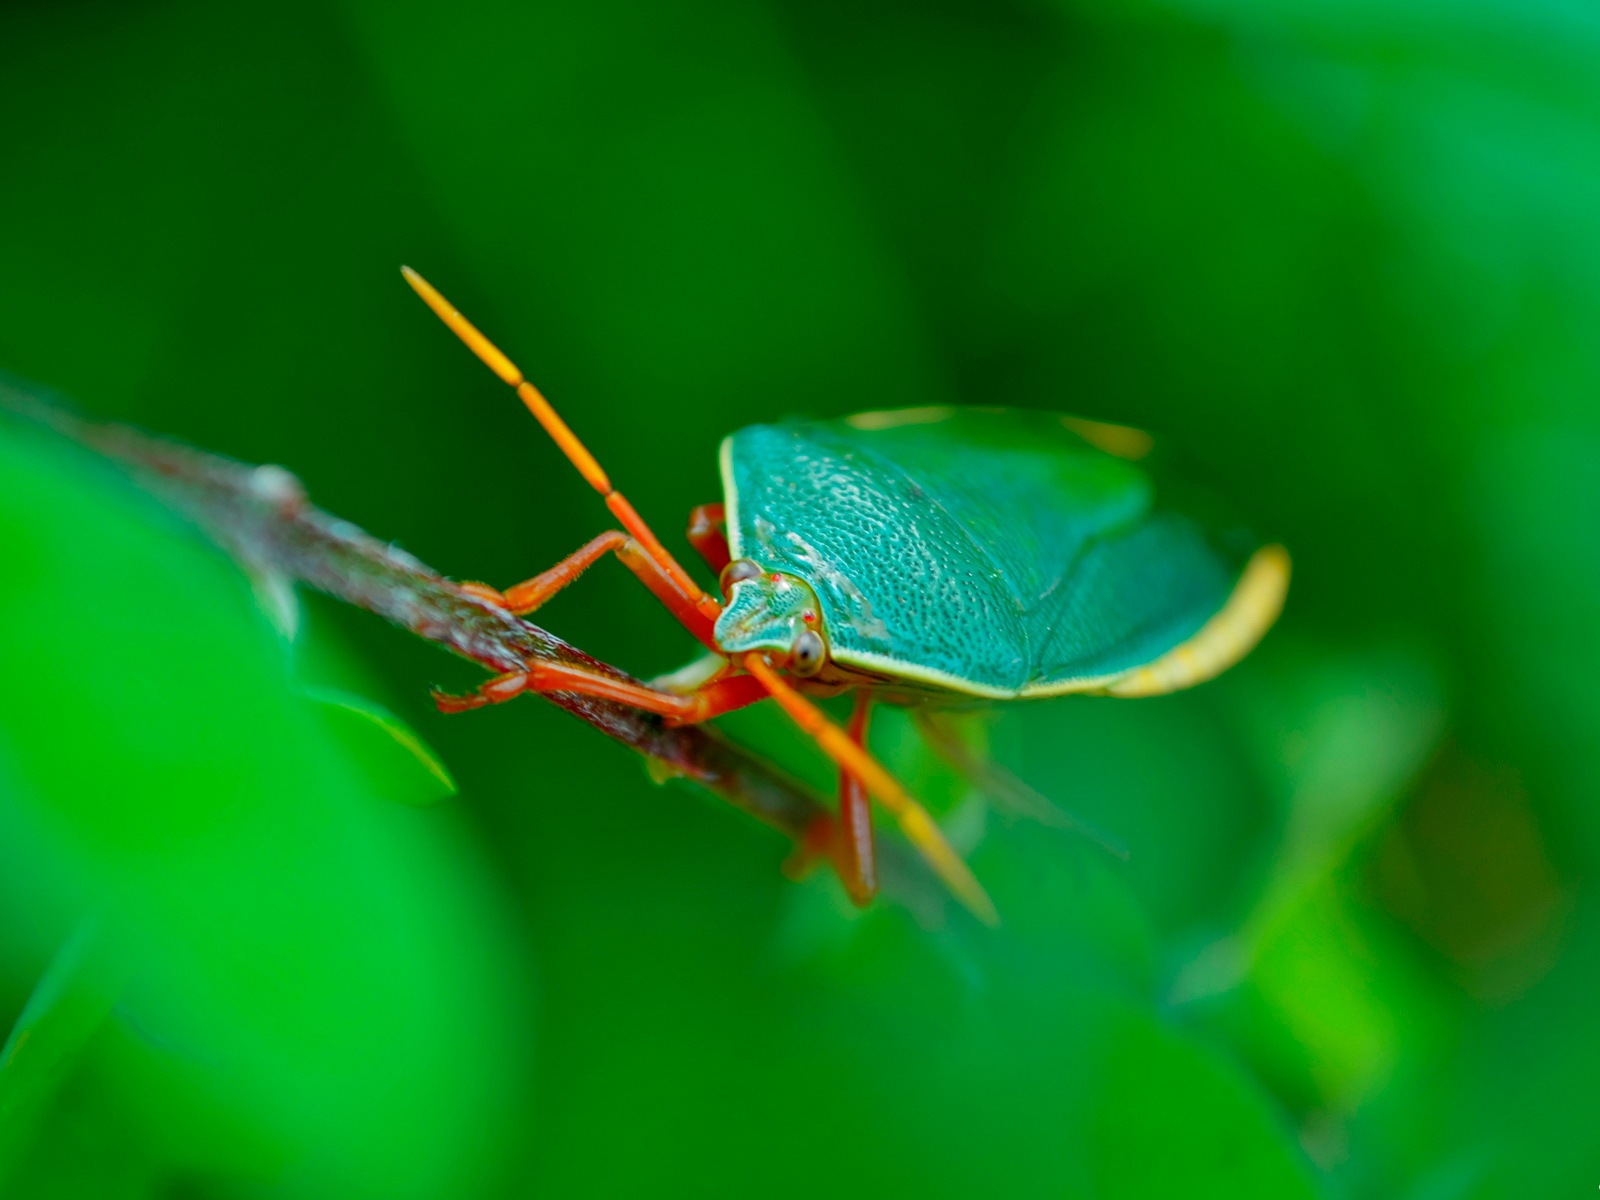 Windows 8 theme wallpaper, insects world #3 - 1600x1200